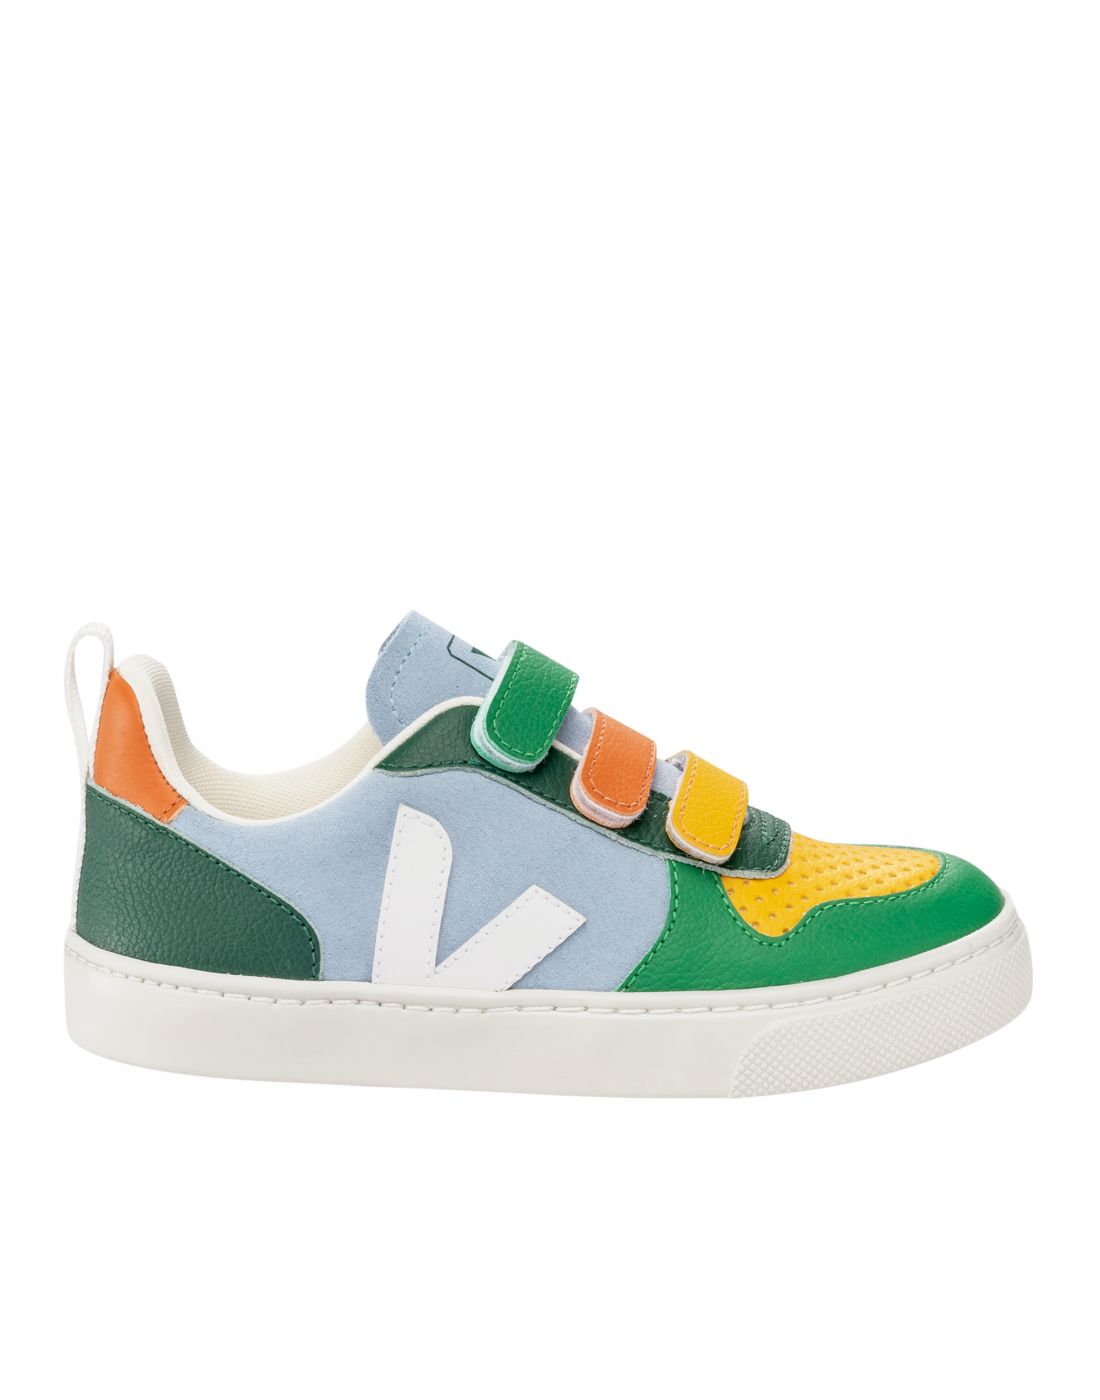 Veja Children's Sneakers Shoes | LAPIN KIDS